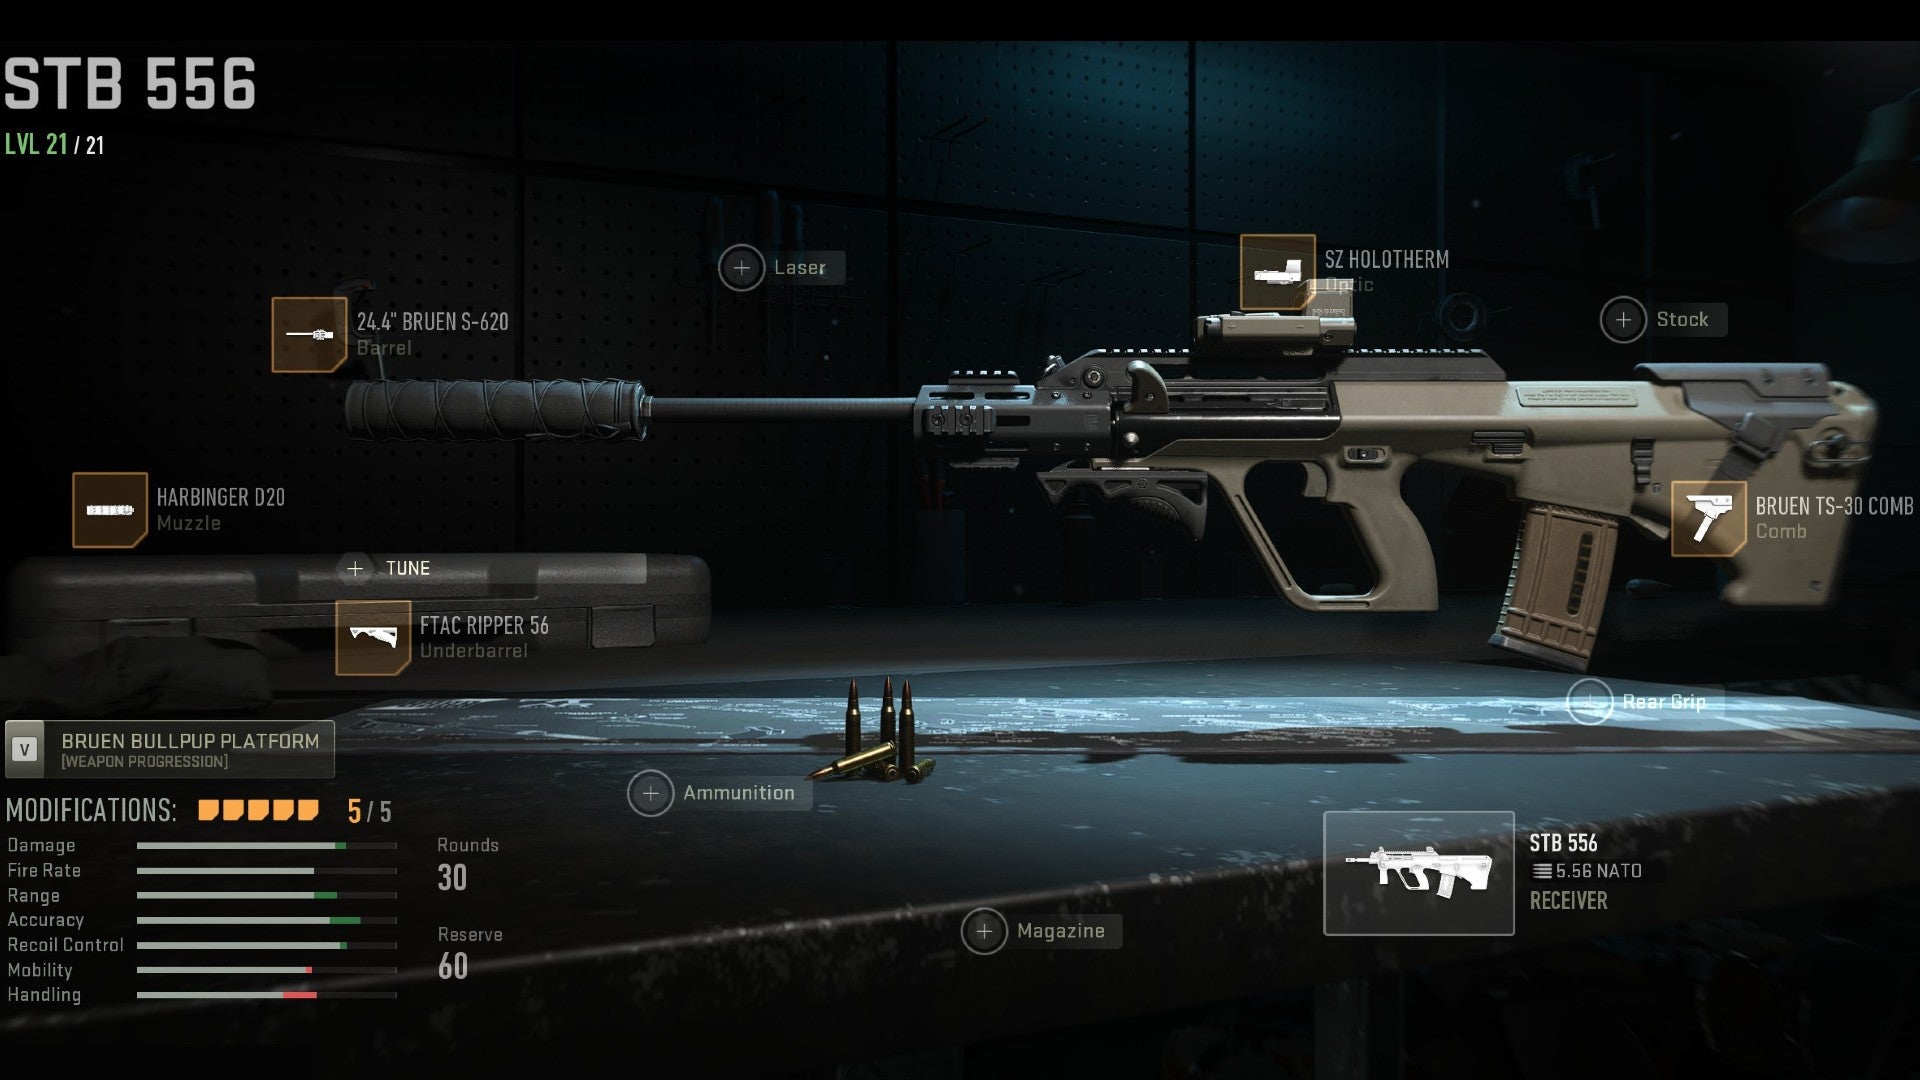 Warzone 2 screenshot showing the STB 556 with the Harbinger D20, 24.4" Bruen S-620, FTAC Ripper 56, SZ Holotherm, and Bruen TS-30 Comb attached.